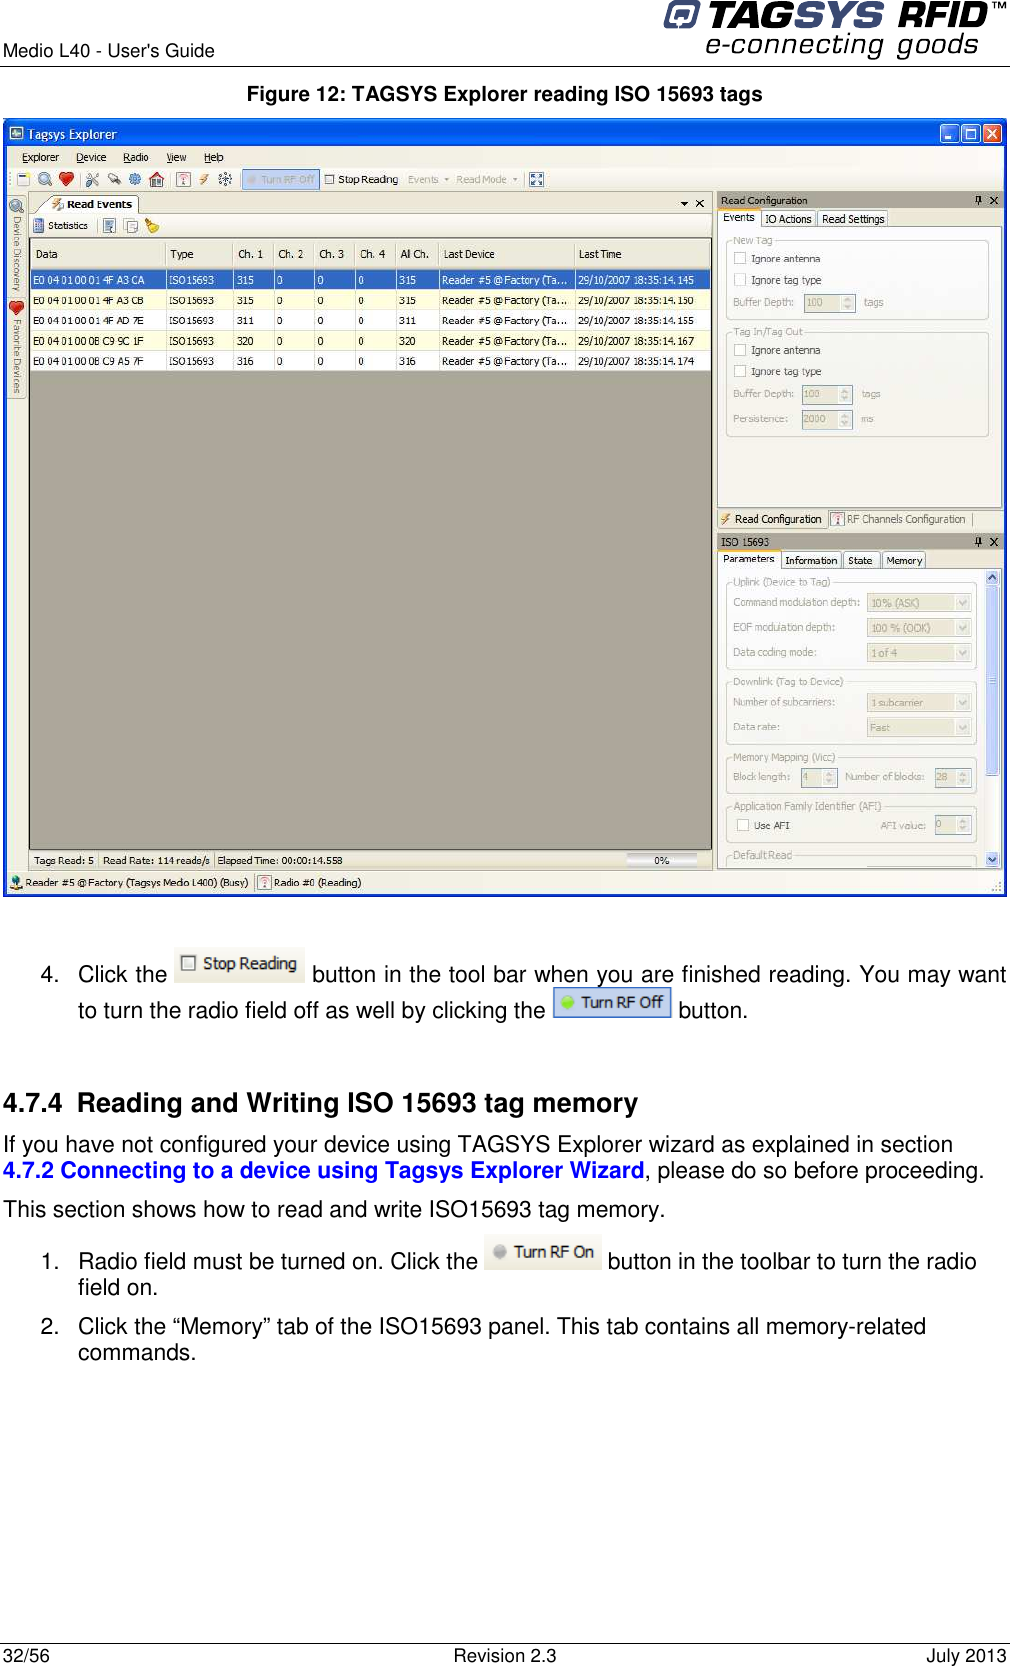  Medio L40 - User&apos;s Guide     32/56  Revision 2.3  July 2013  Figure 12: TAGSYS Explorer reading ISO 15693 tags   4.  Click the   button in the tool bar when you are finished reading. You may want to turn the radio field off as well by clicking the   button.  4.7.4  Reading and Writing ISO 15693 tag memory If you have not configured your device using TAGSYS Explorer wizard as explained in section 4.7.2 Connecting to a device using Tagsys Explorer Wizard, please do so before proceeding. This section shows how to read and write ISO15693 tag memory. 1.  Radio field must be turned on. Click the   button in the toolbar to turn the radio field on. 2.  Click the “Memory” tab of the ISO15693 panel. This tab contains all memory-related commands. 